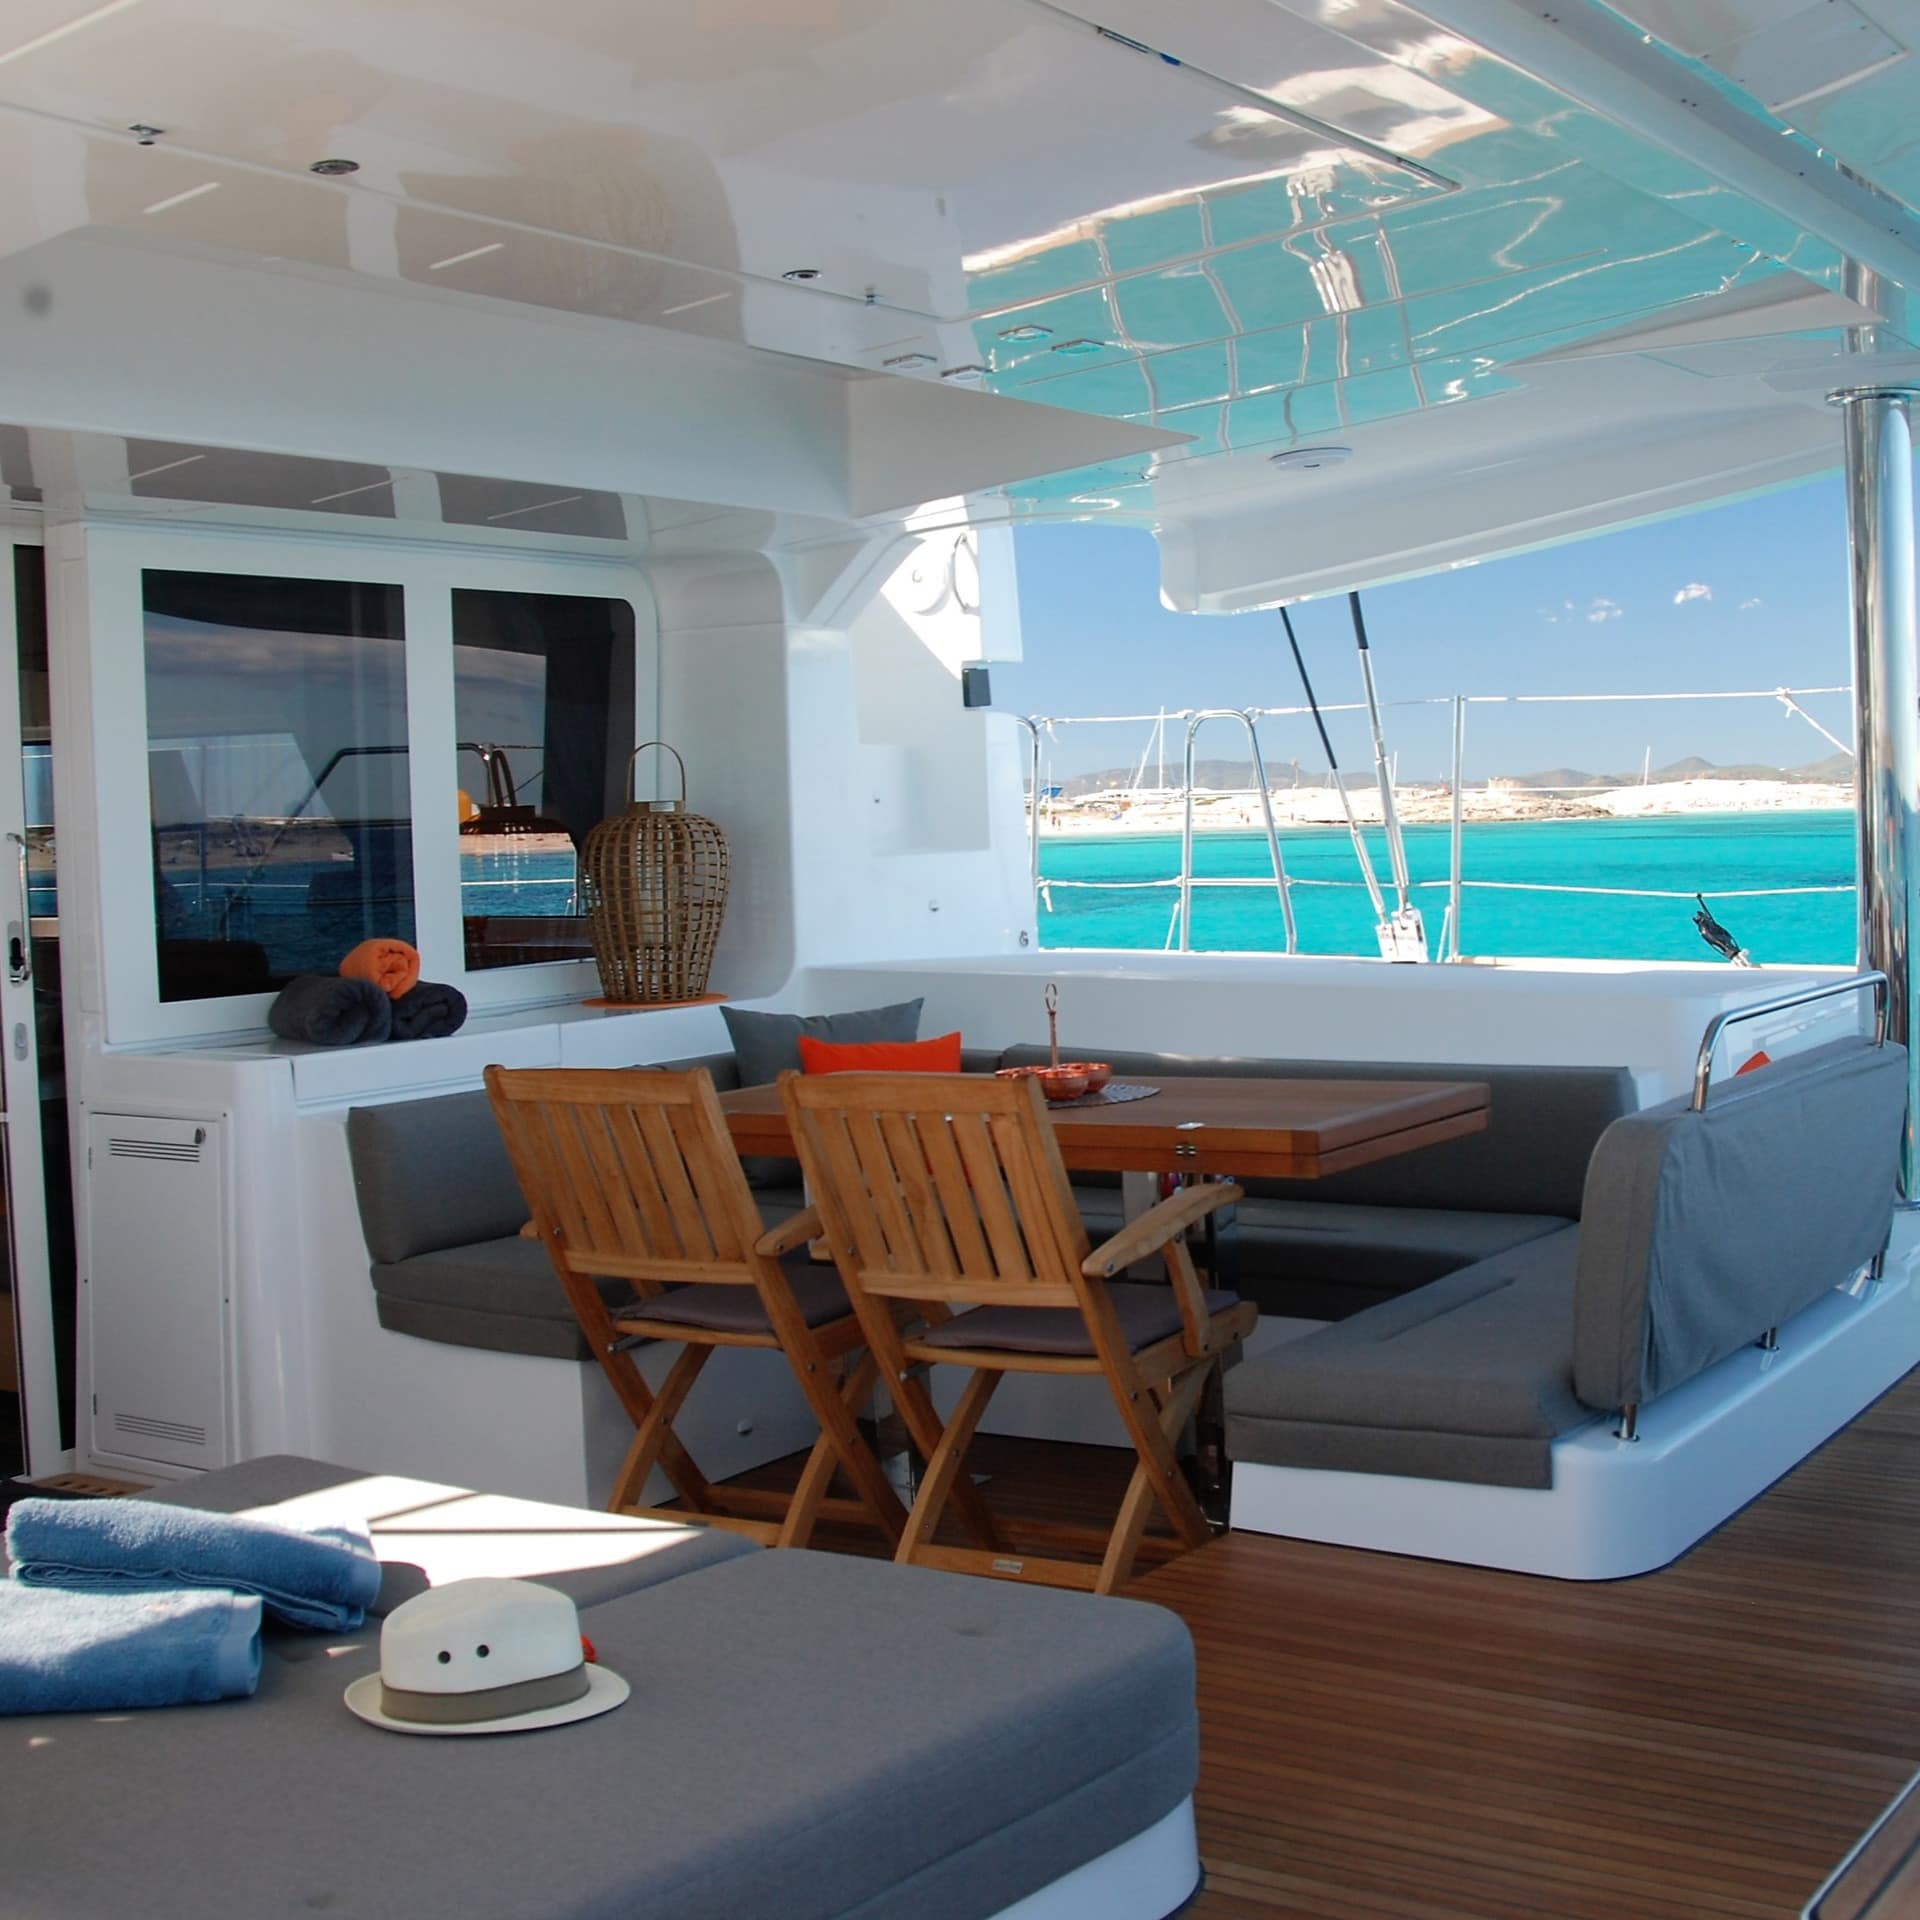 Outdoor living space on a luxury yacht in the Caribbean